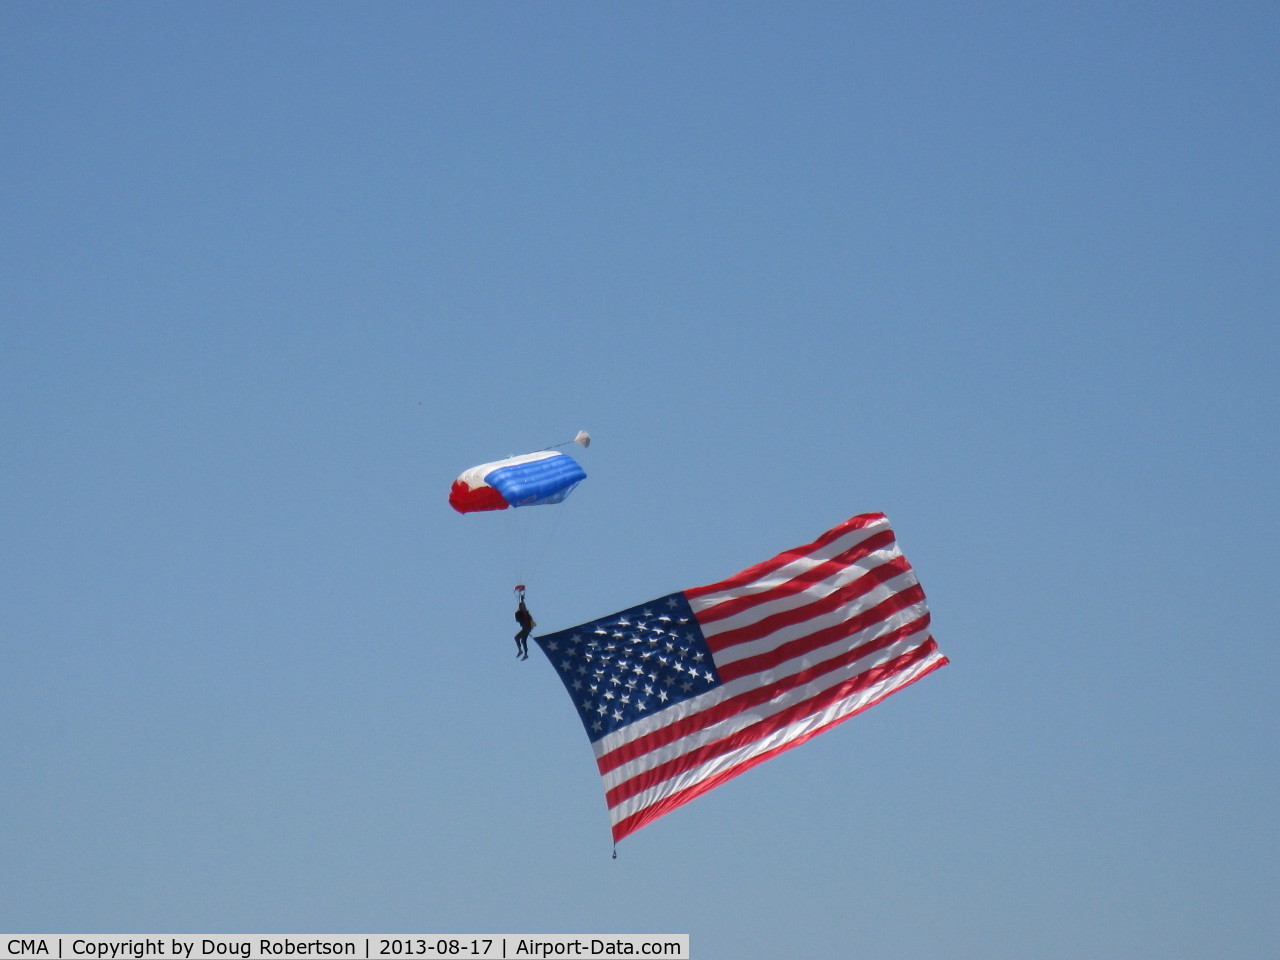 Camarillo Airport (CMA) - Parachute Jumper opening Wings Over Camarillo Airshow 2013 with OLD GLORY